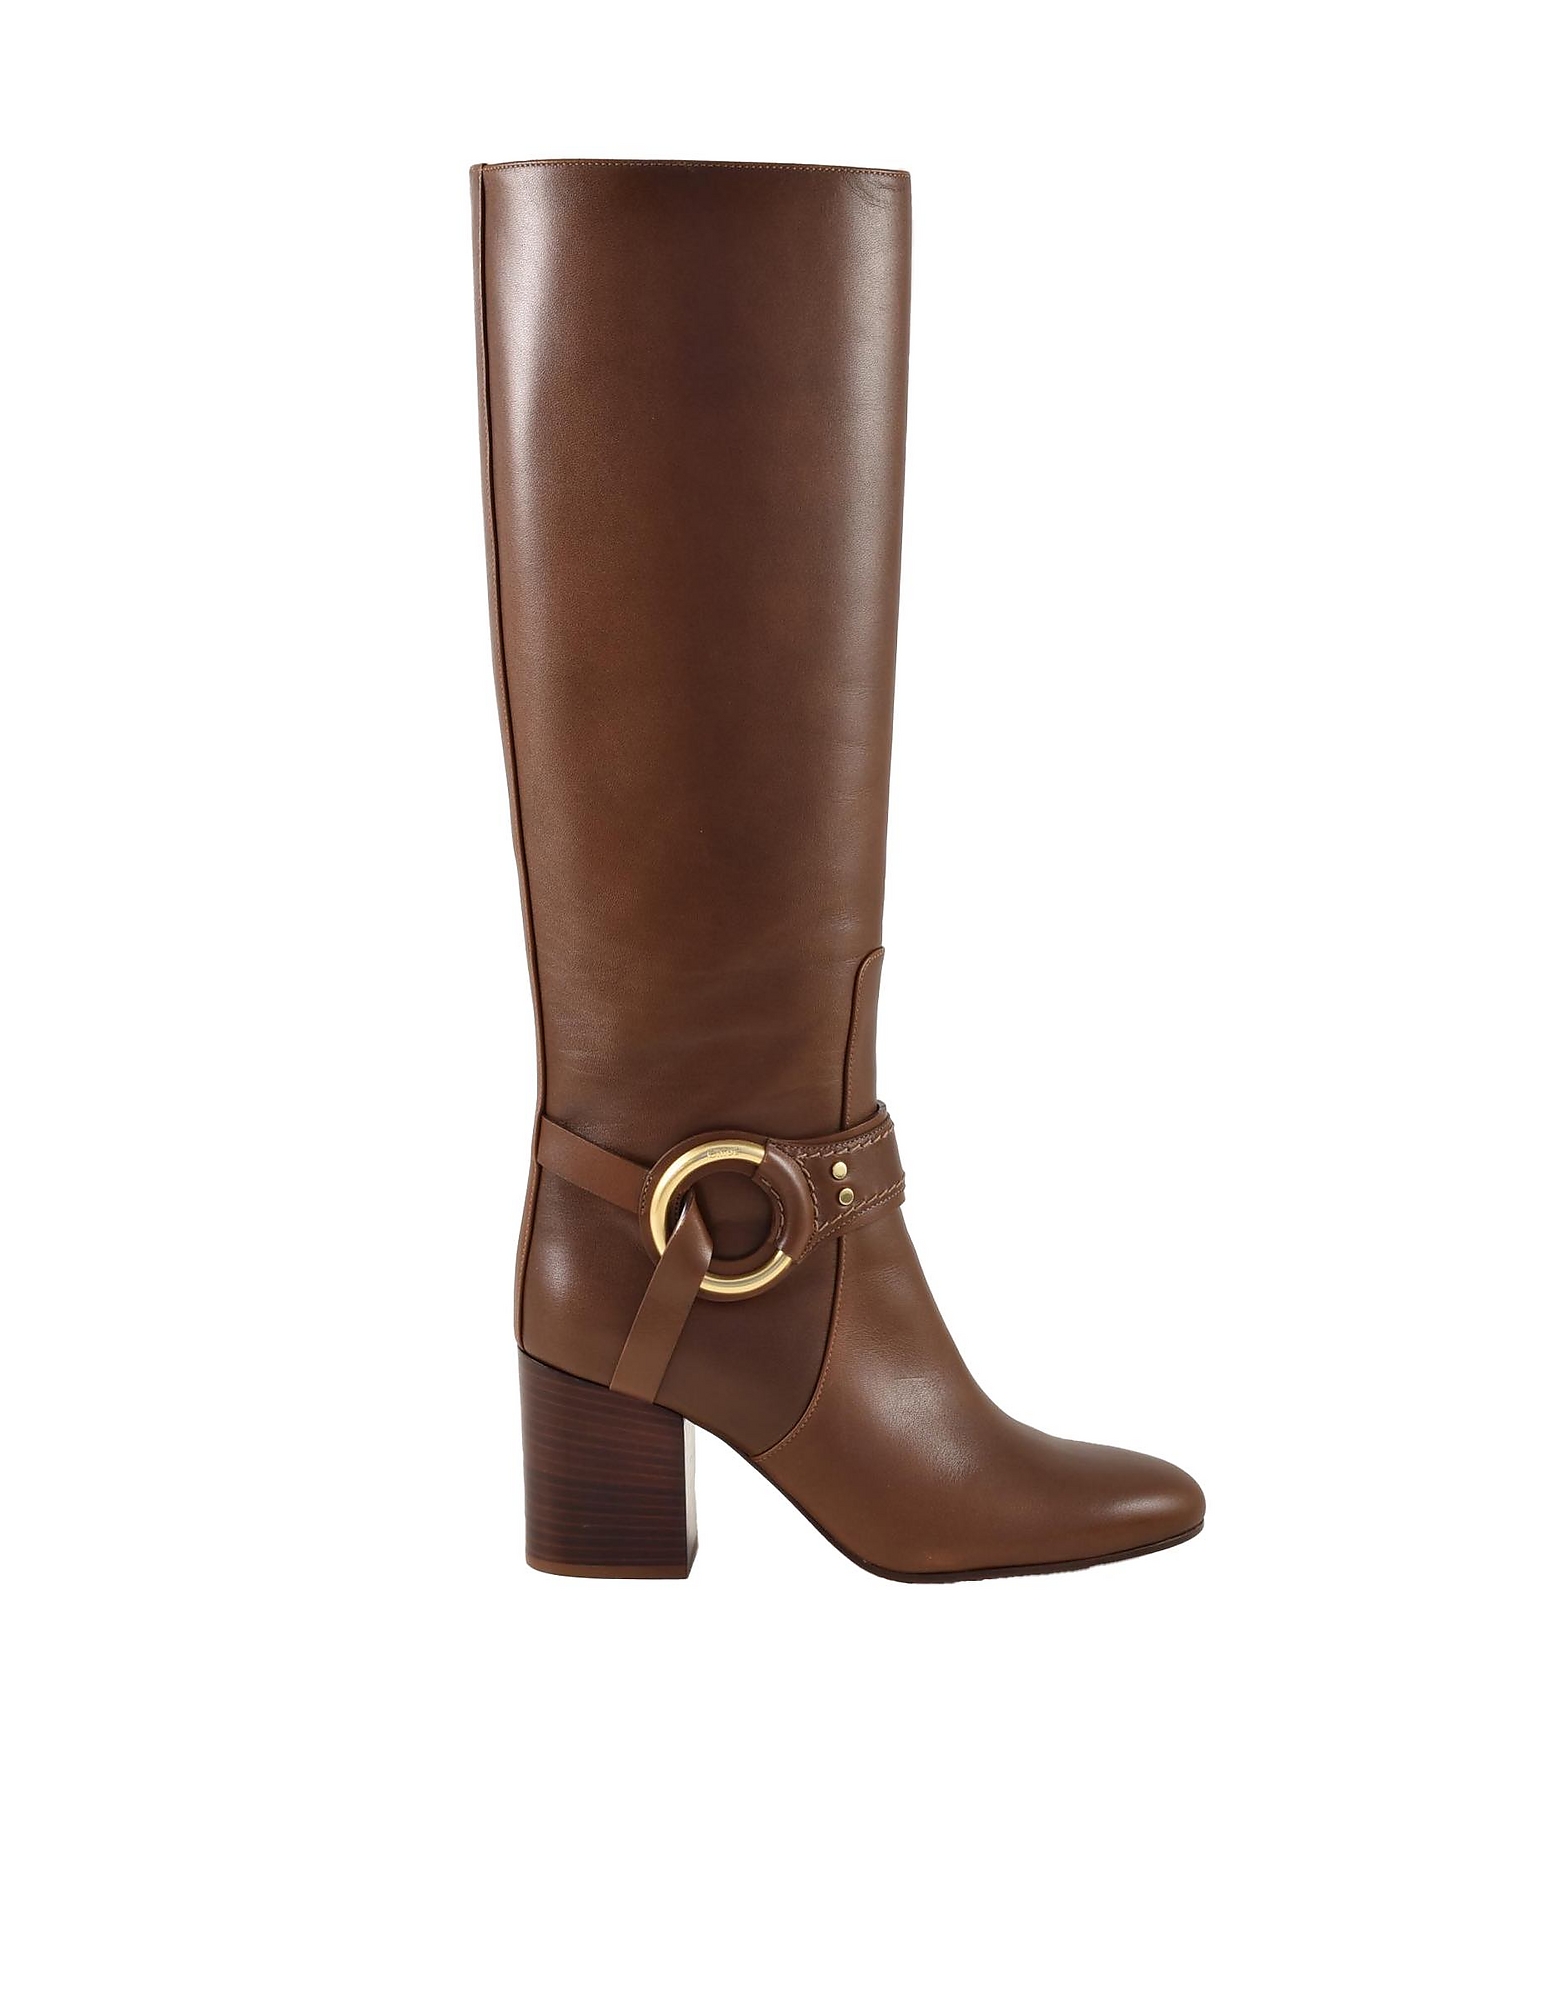 Chlo�  Shoes Women's Brown Boots